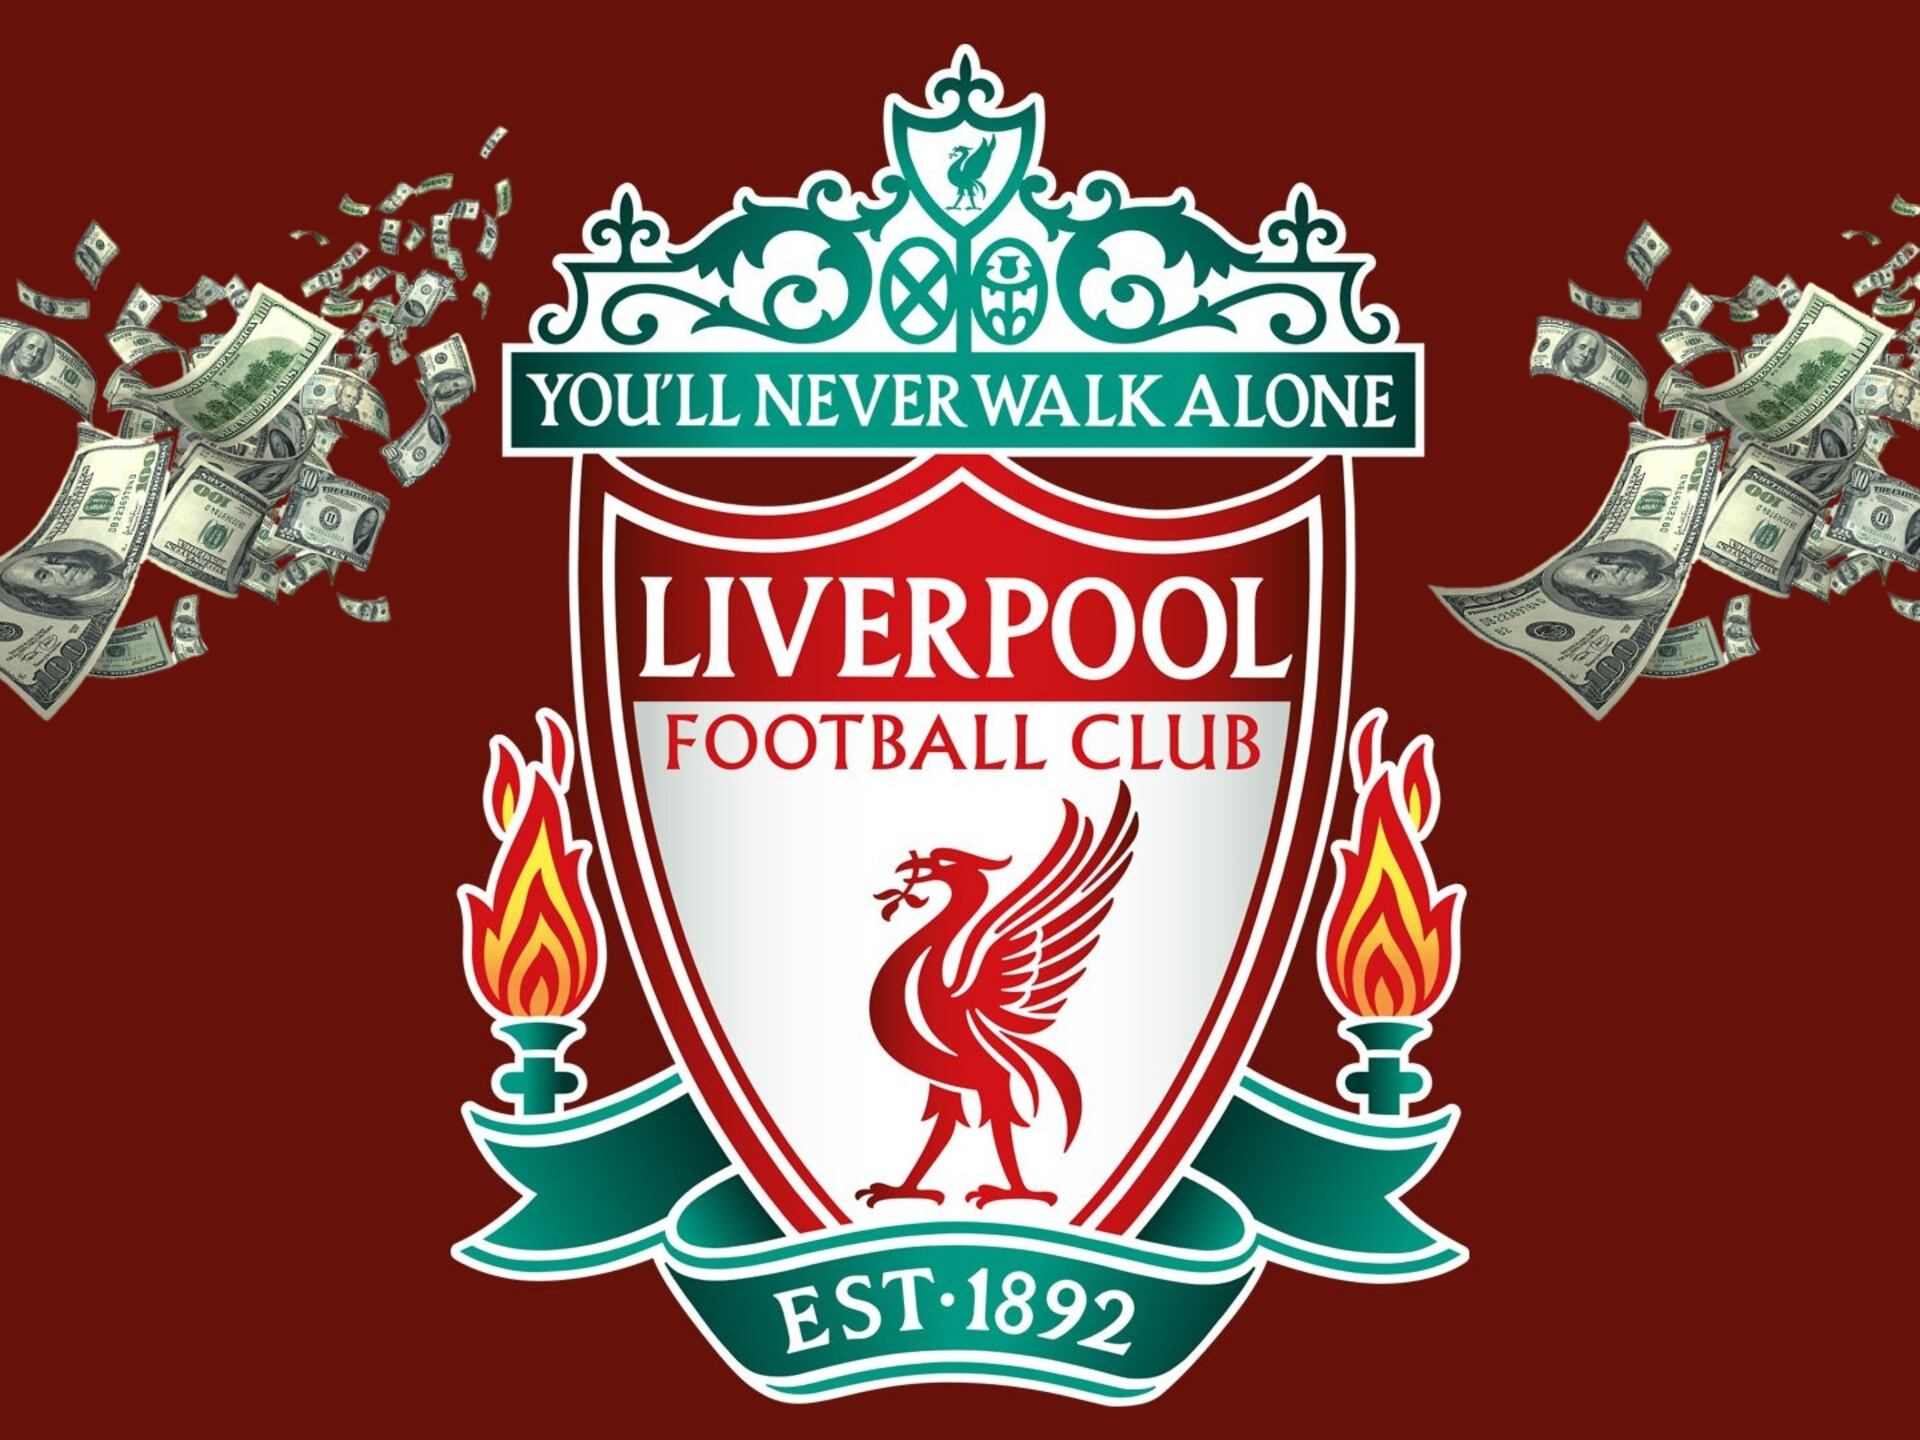 More than $150M, the new contract between Liverpool and Adidas and who they would sign with the earnings